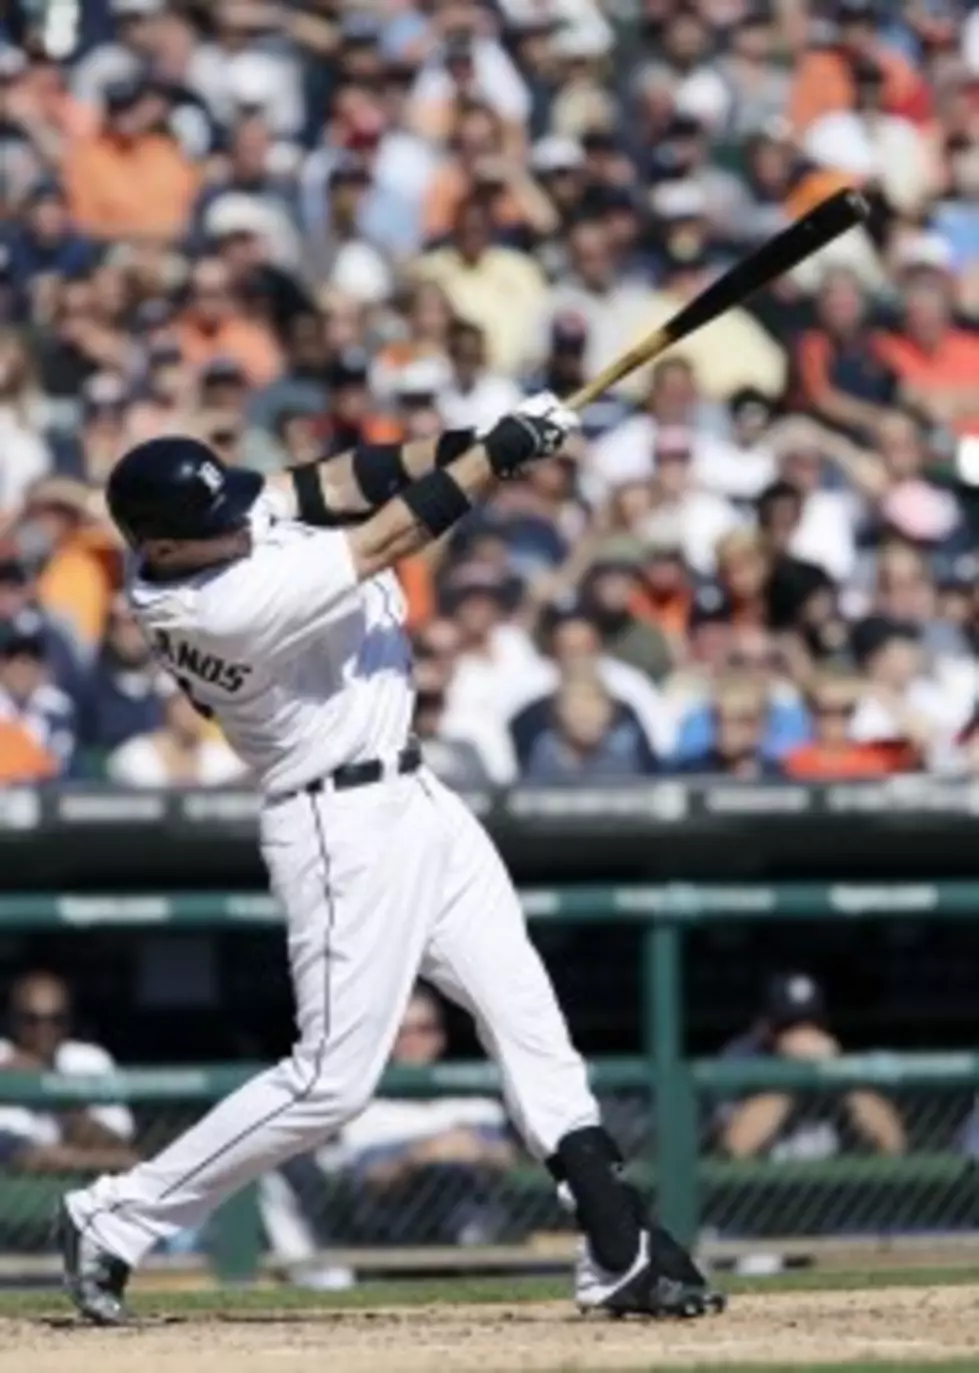 Tigers Inch Closer To Postseason, Knock Off Sox 6-1